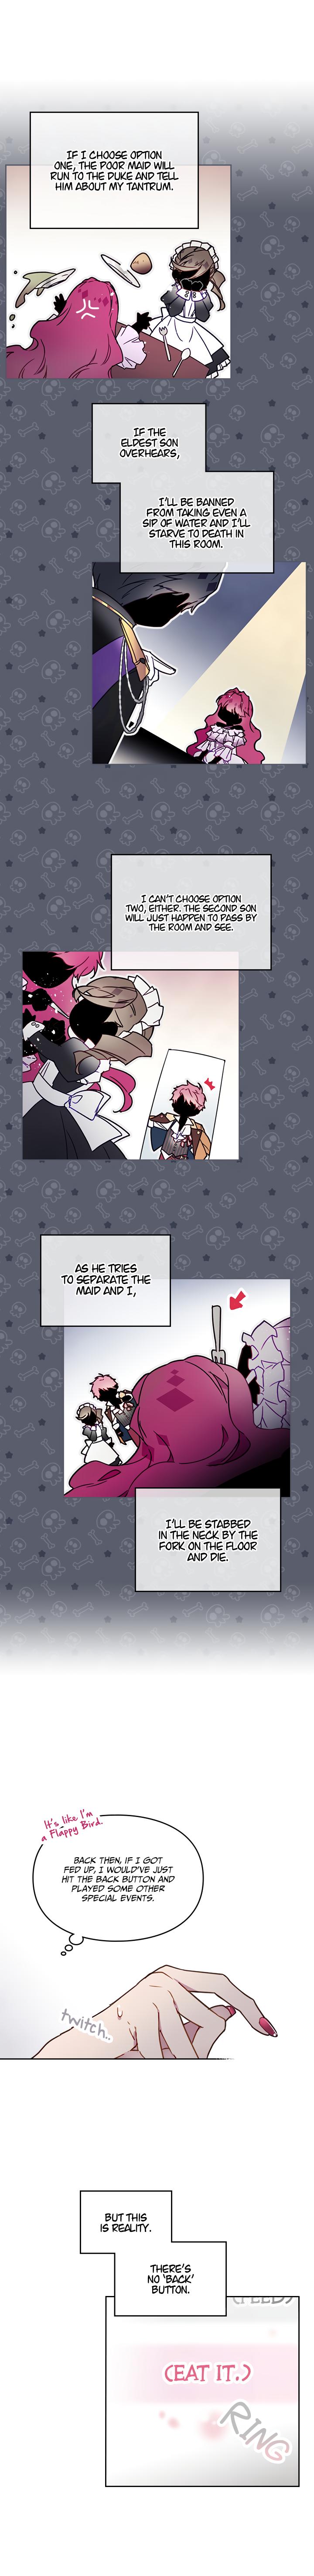 Villains Are Destined To Die Chapter 3 page 2 - 